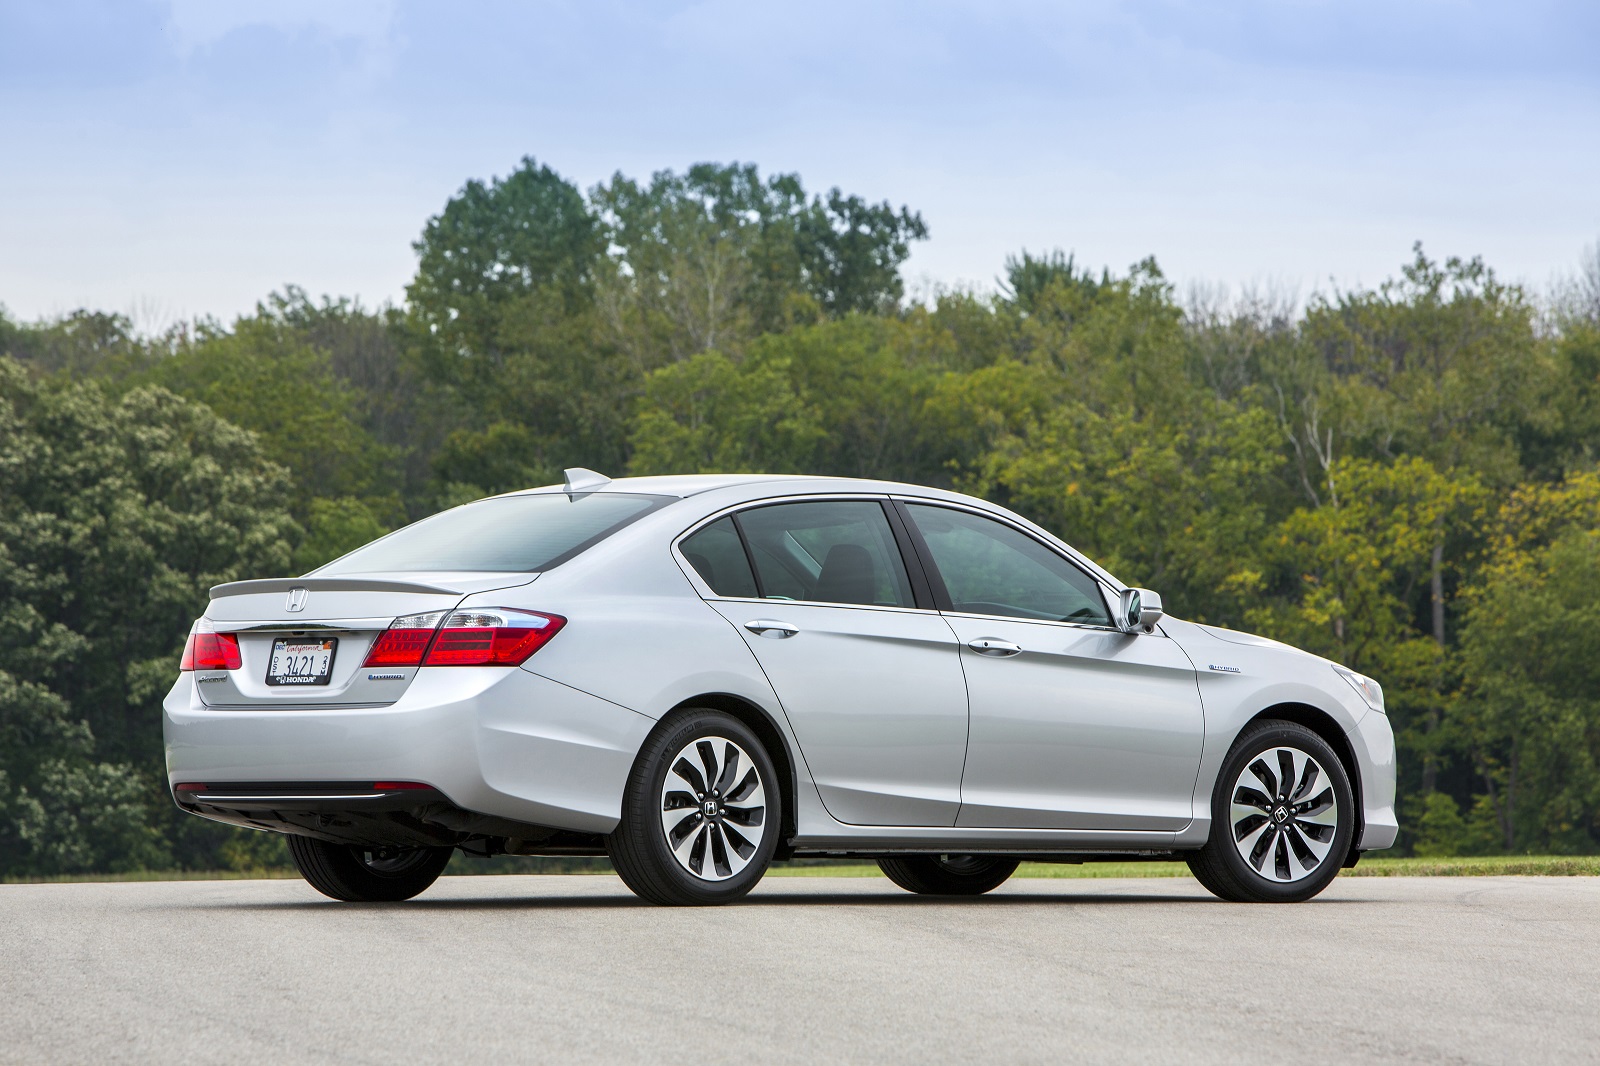 2015 Honda Accord Review, Ratings, Specs, Prices, and Photos - The Car